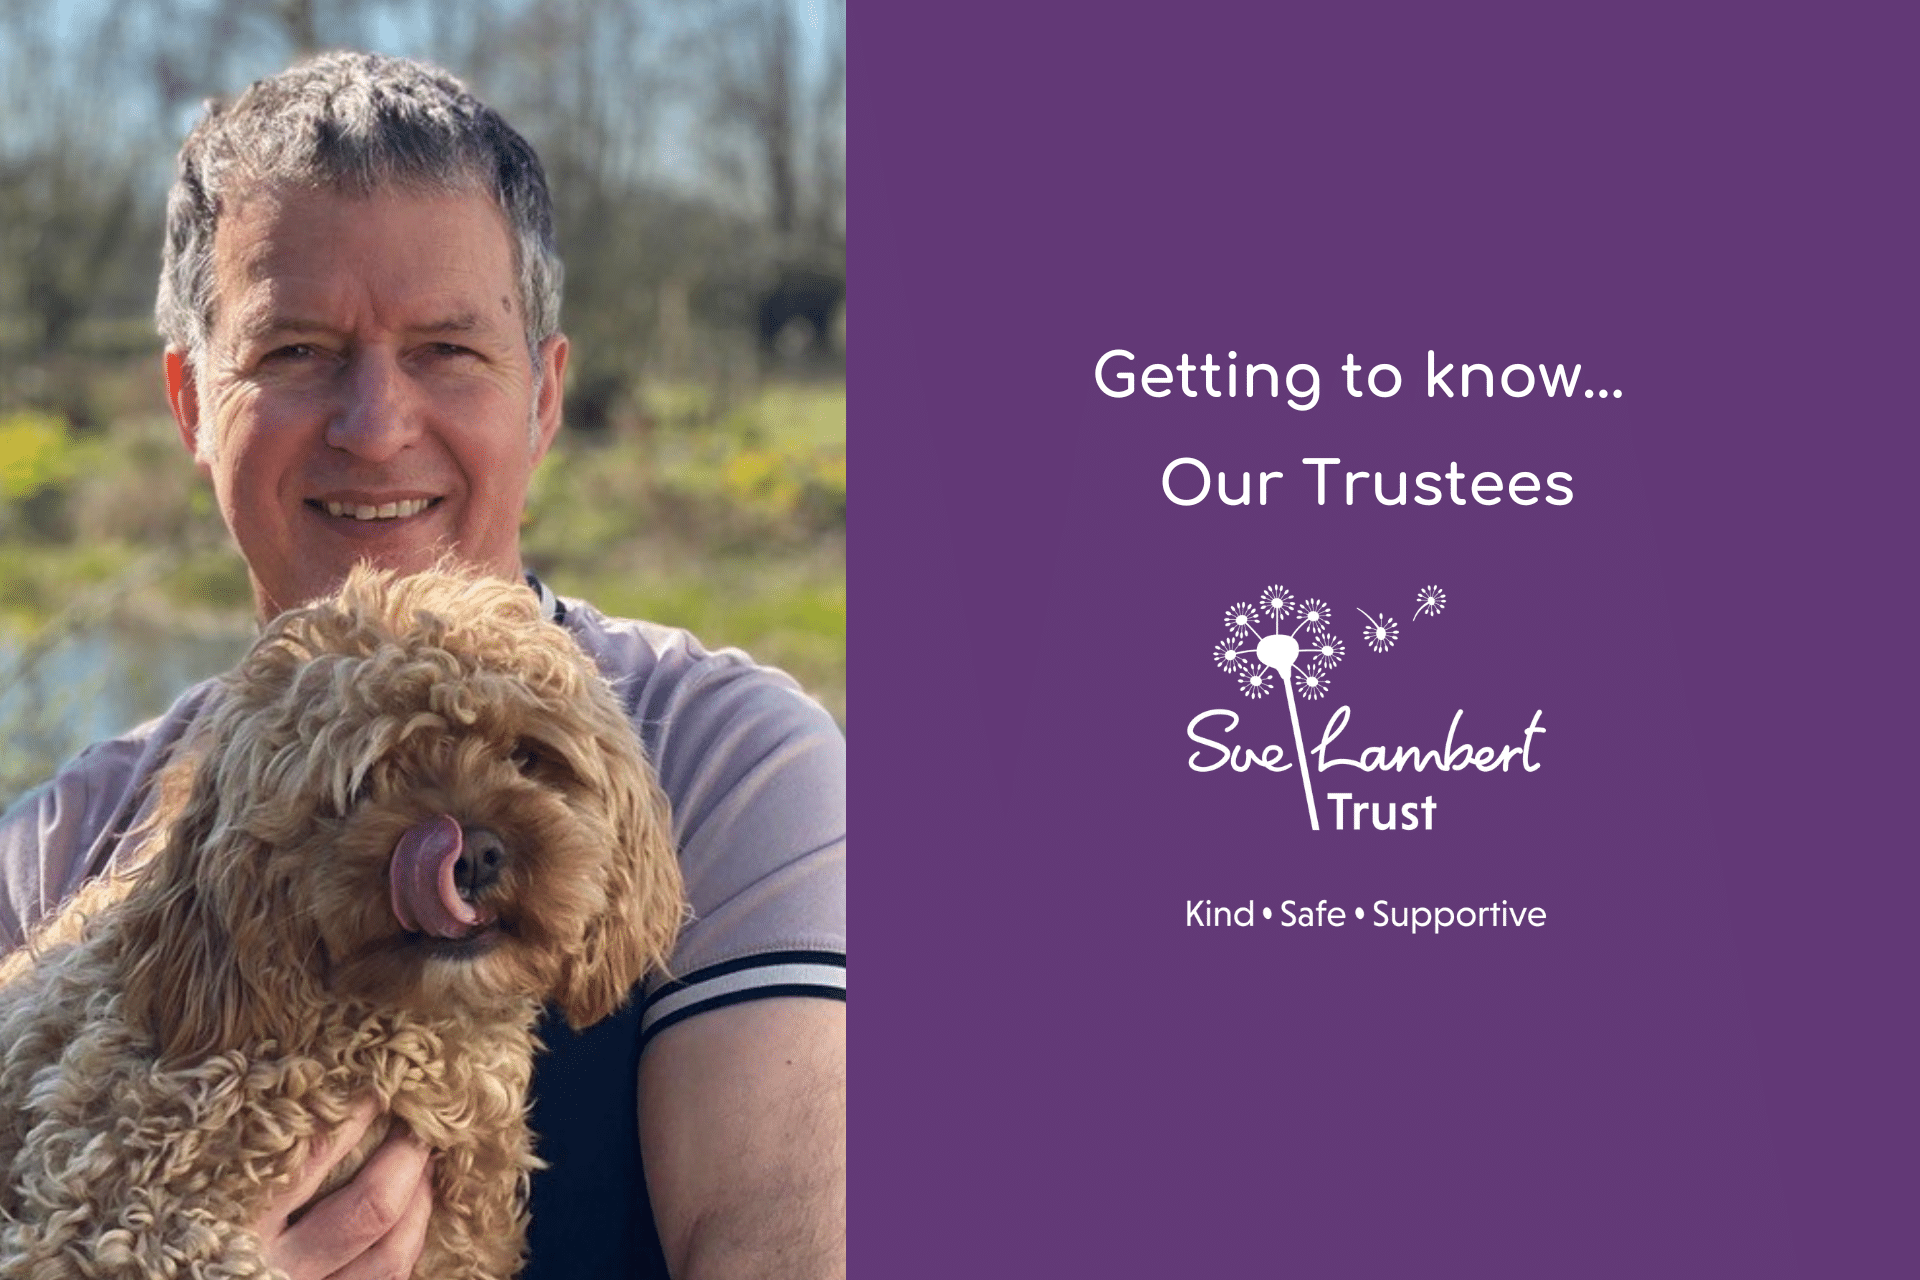 Getting to know our trustees - David vail image with his dog